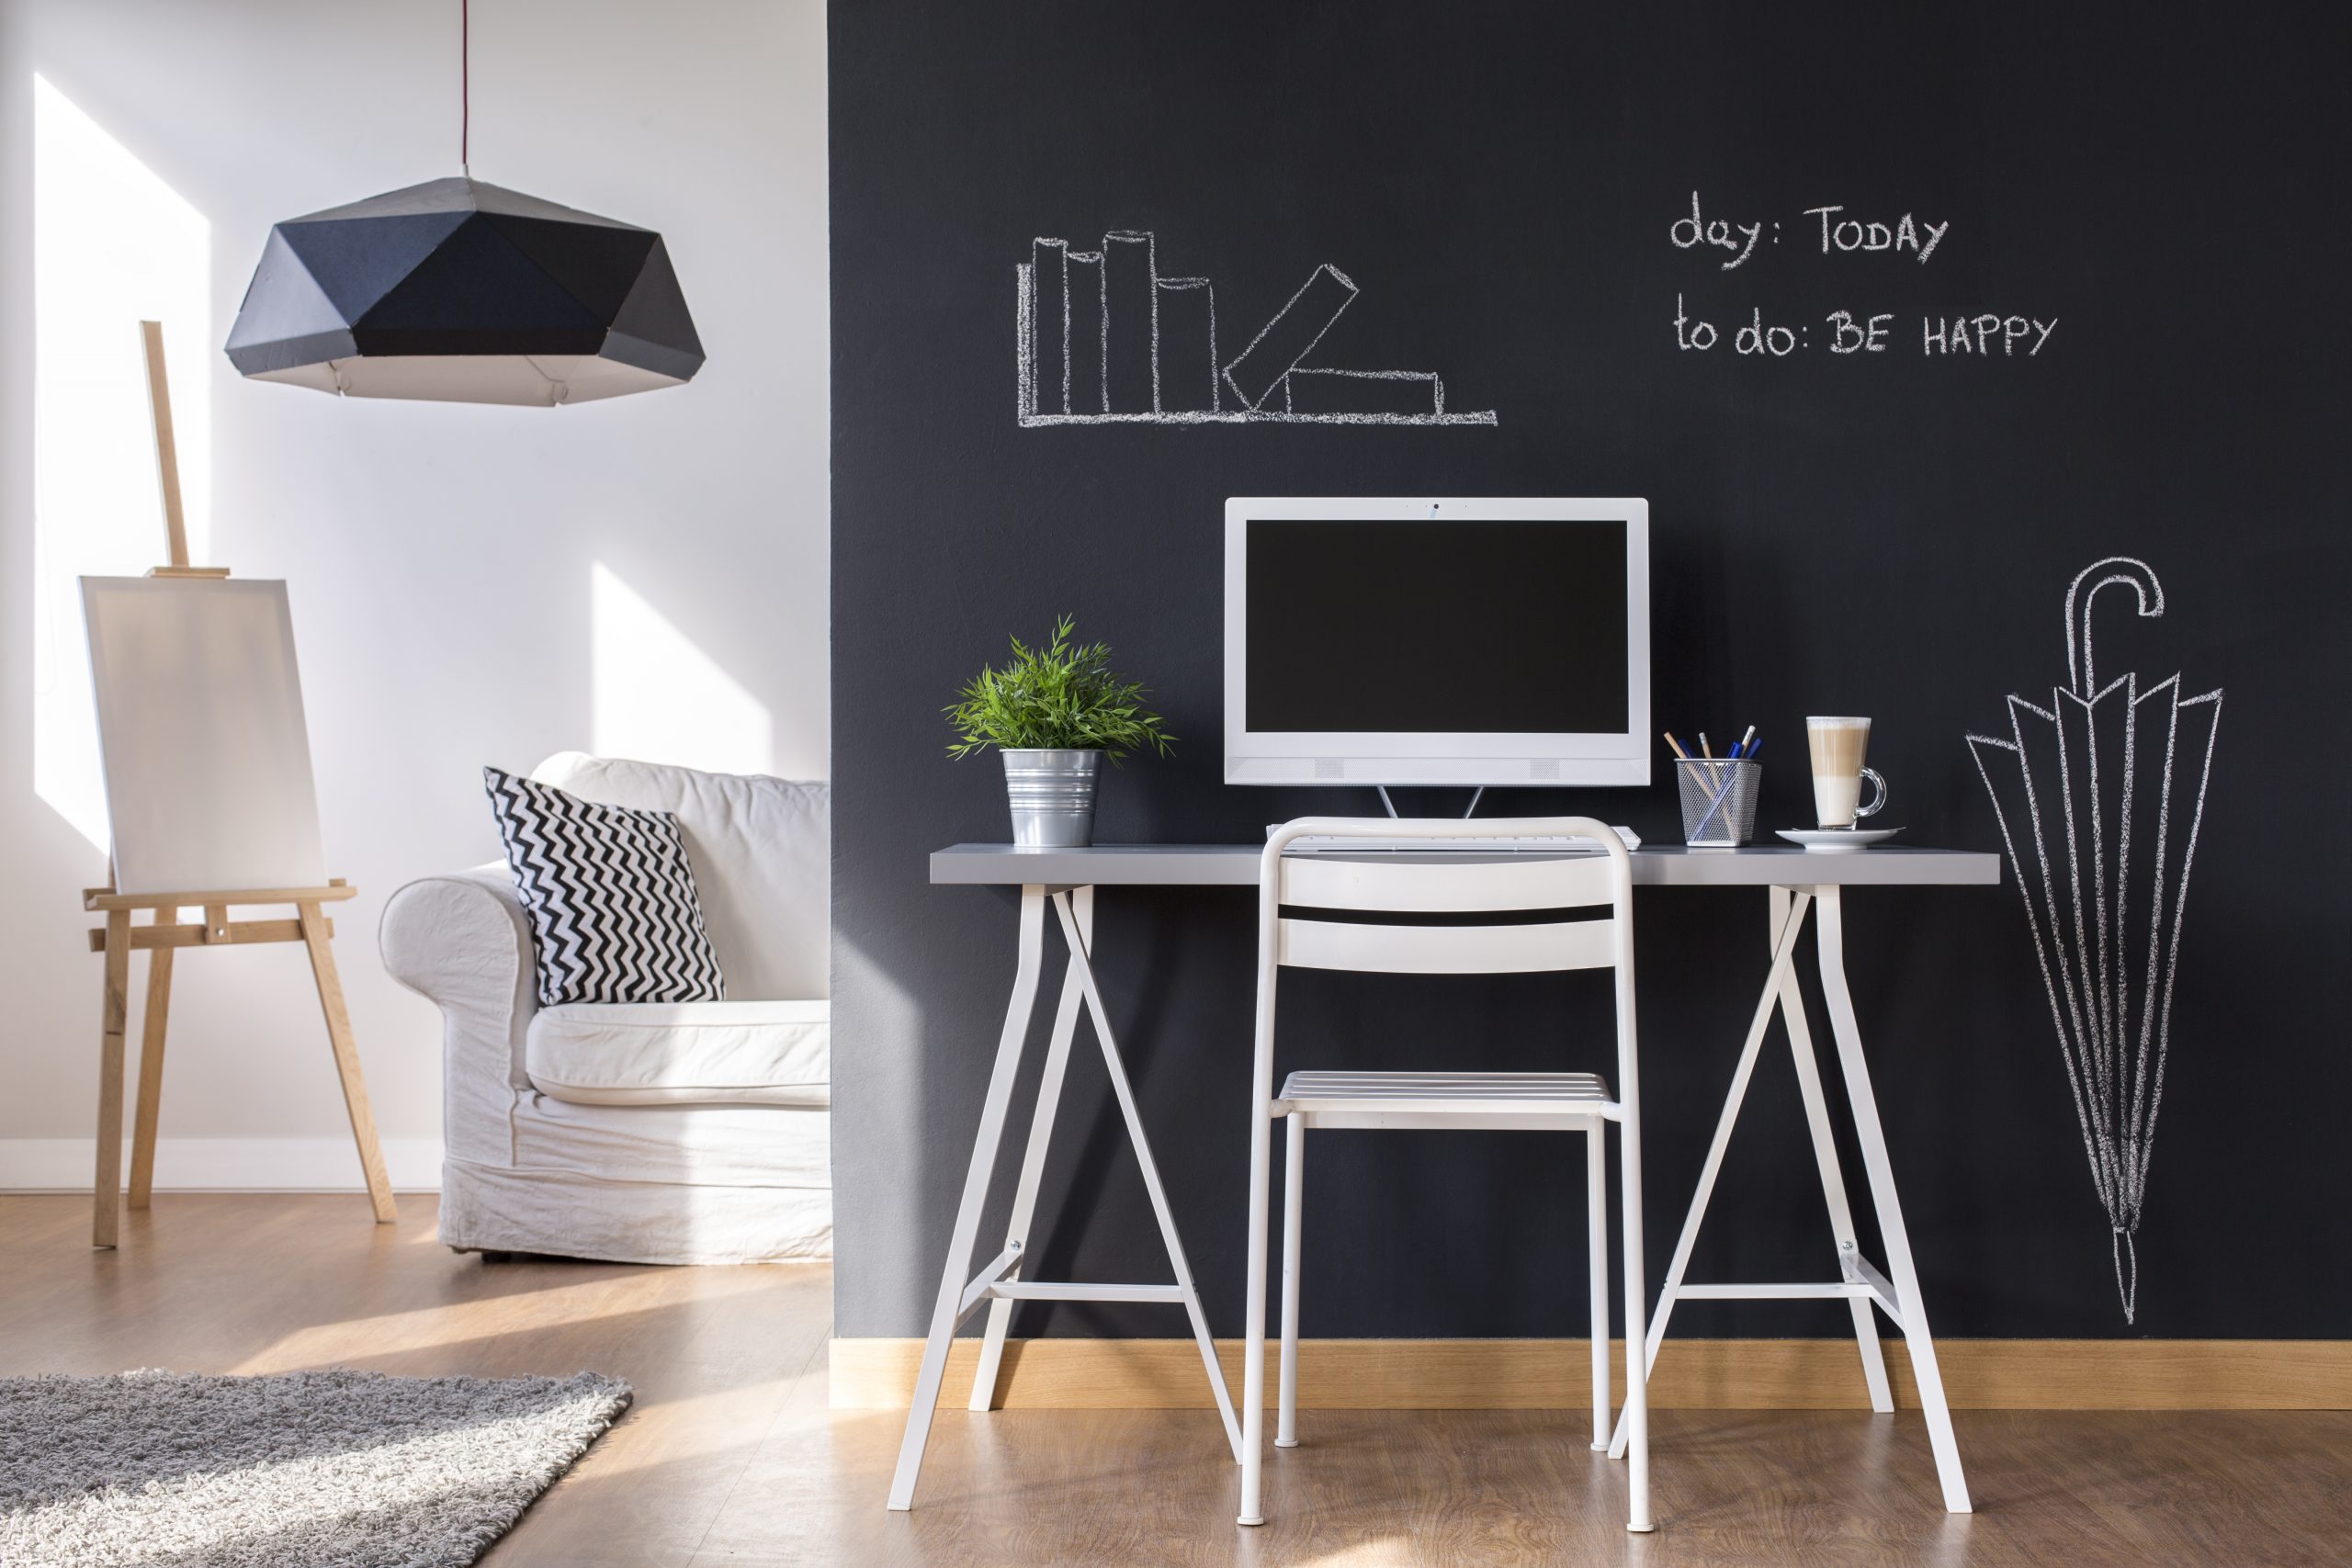 Minimalist modern work space at home with blackboard wall